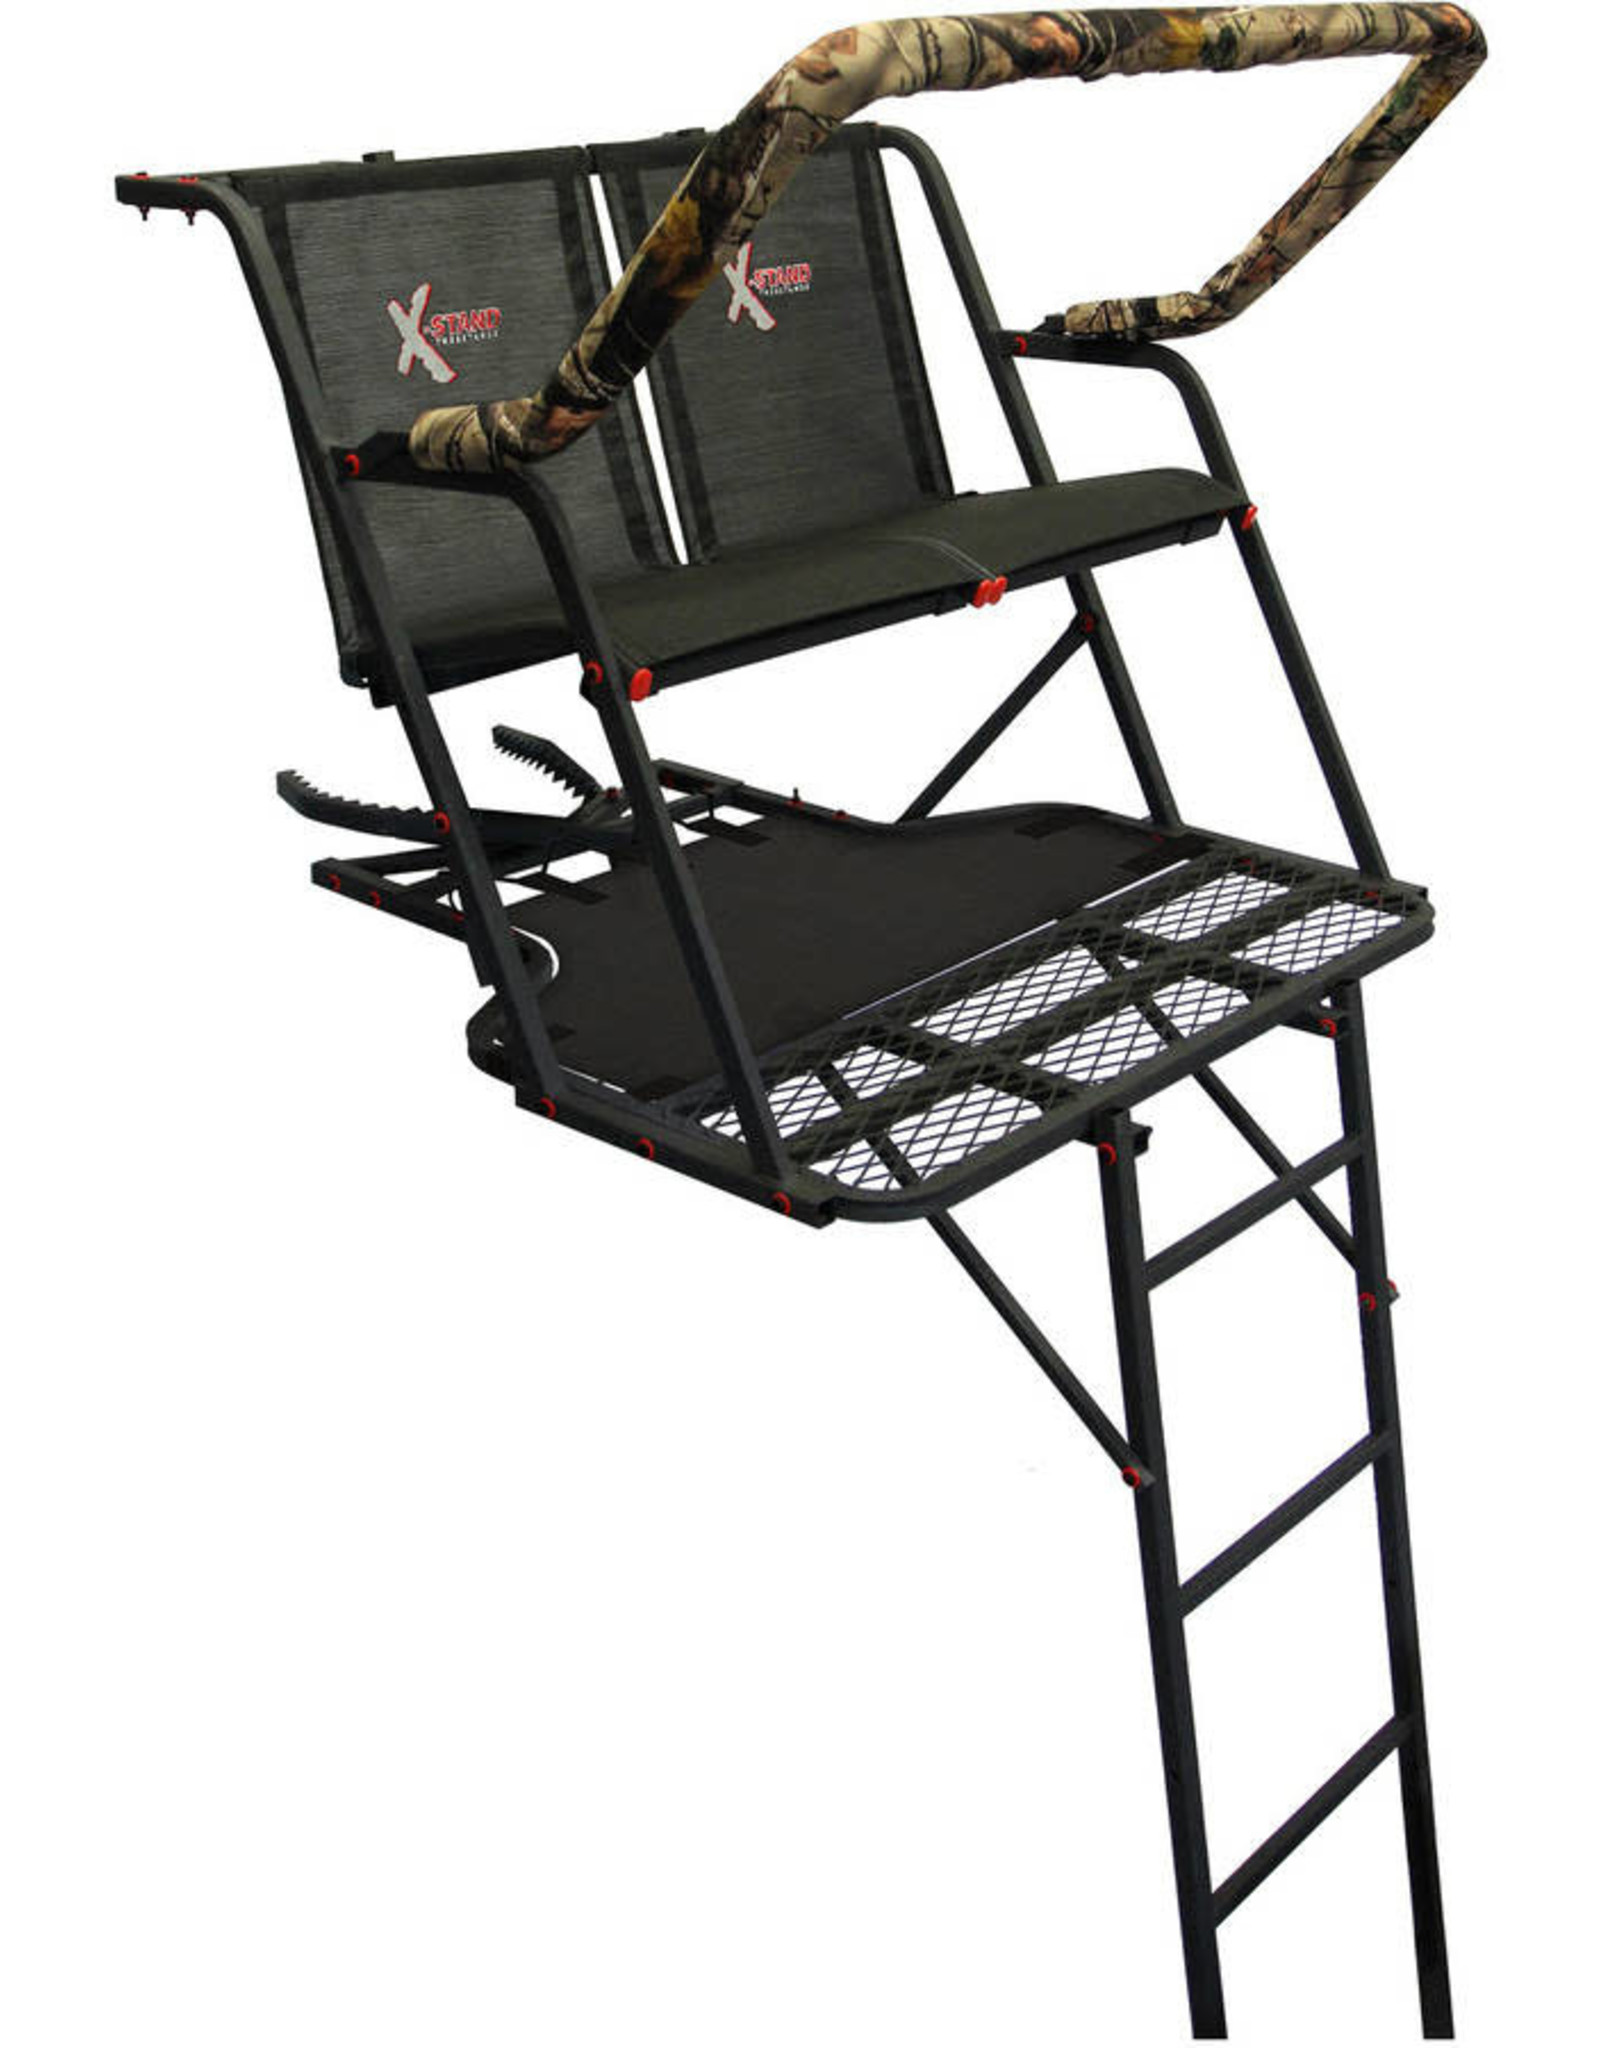 X-STAND THE OUTBACK 16’ TWO PERSON LADDER STAND